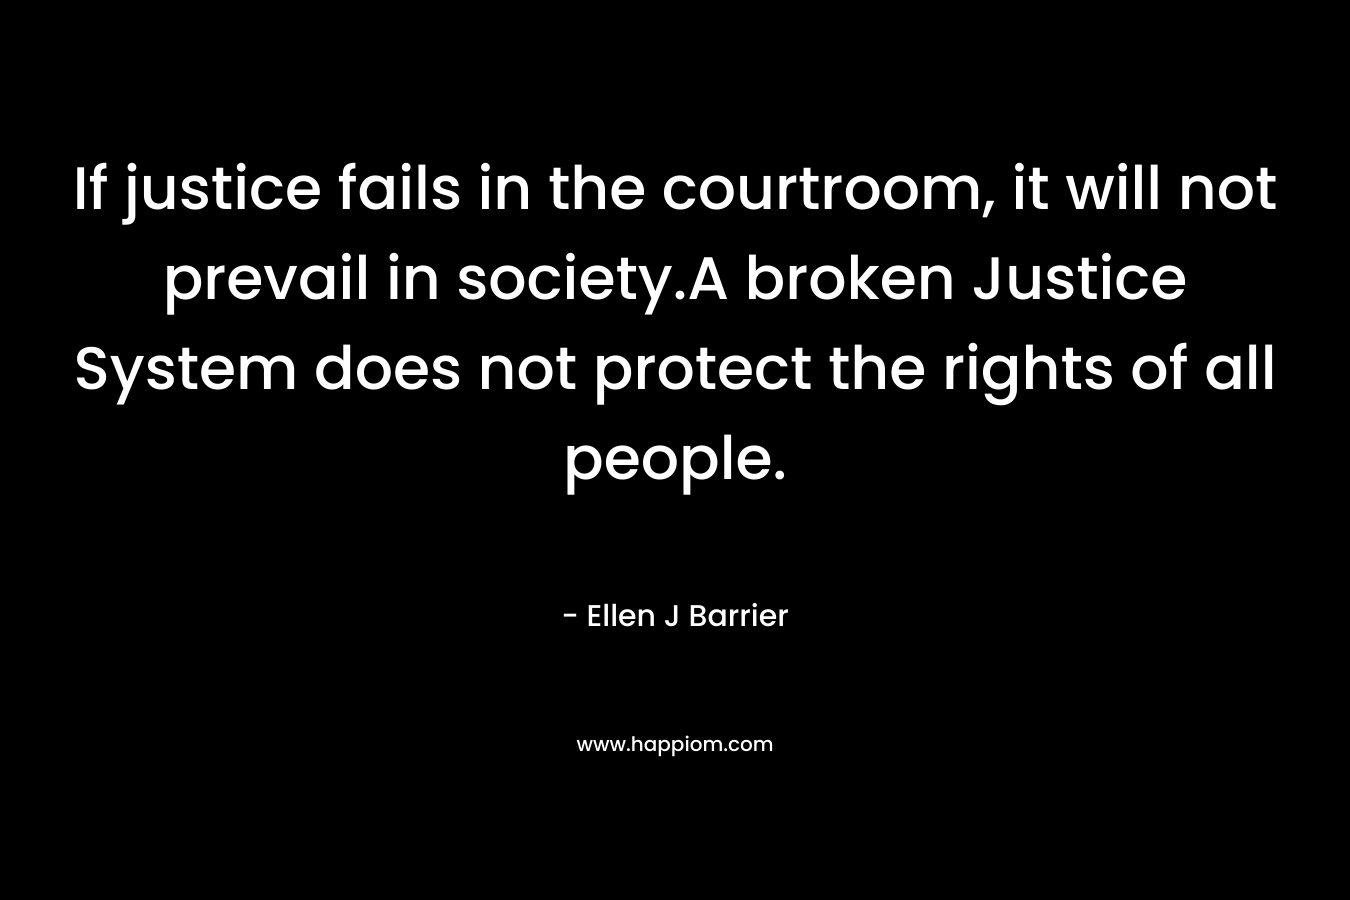 If justice fails in the courtroom, it will not prevail in society.A broken Justice System does not protect the rights of all people. – Ellen J Barrier